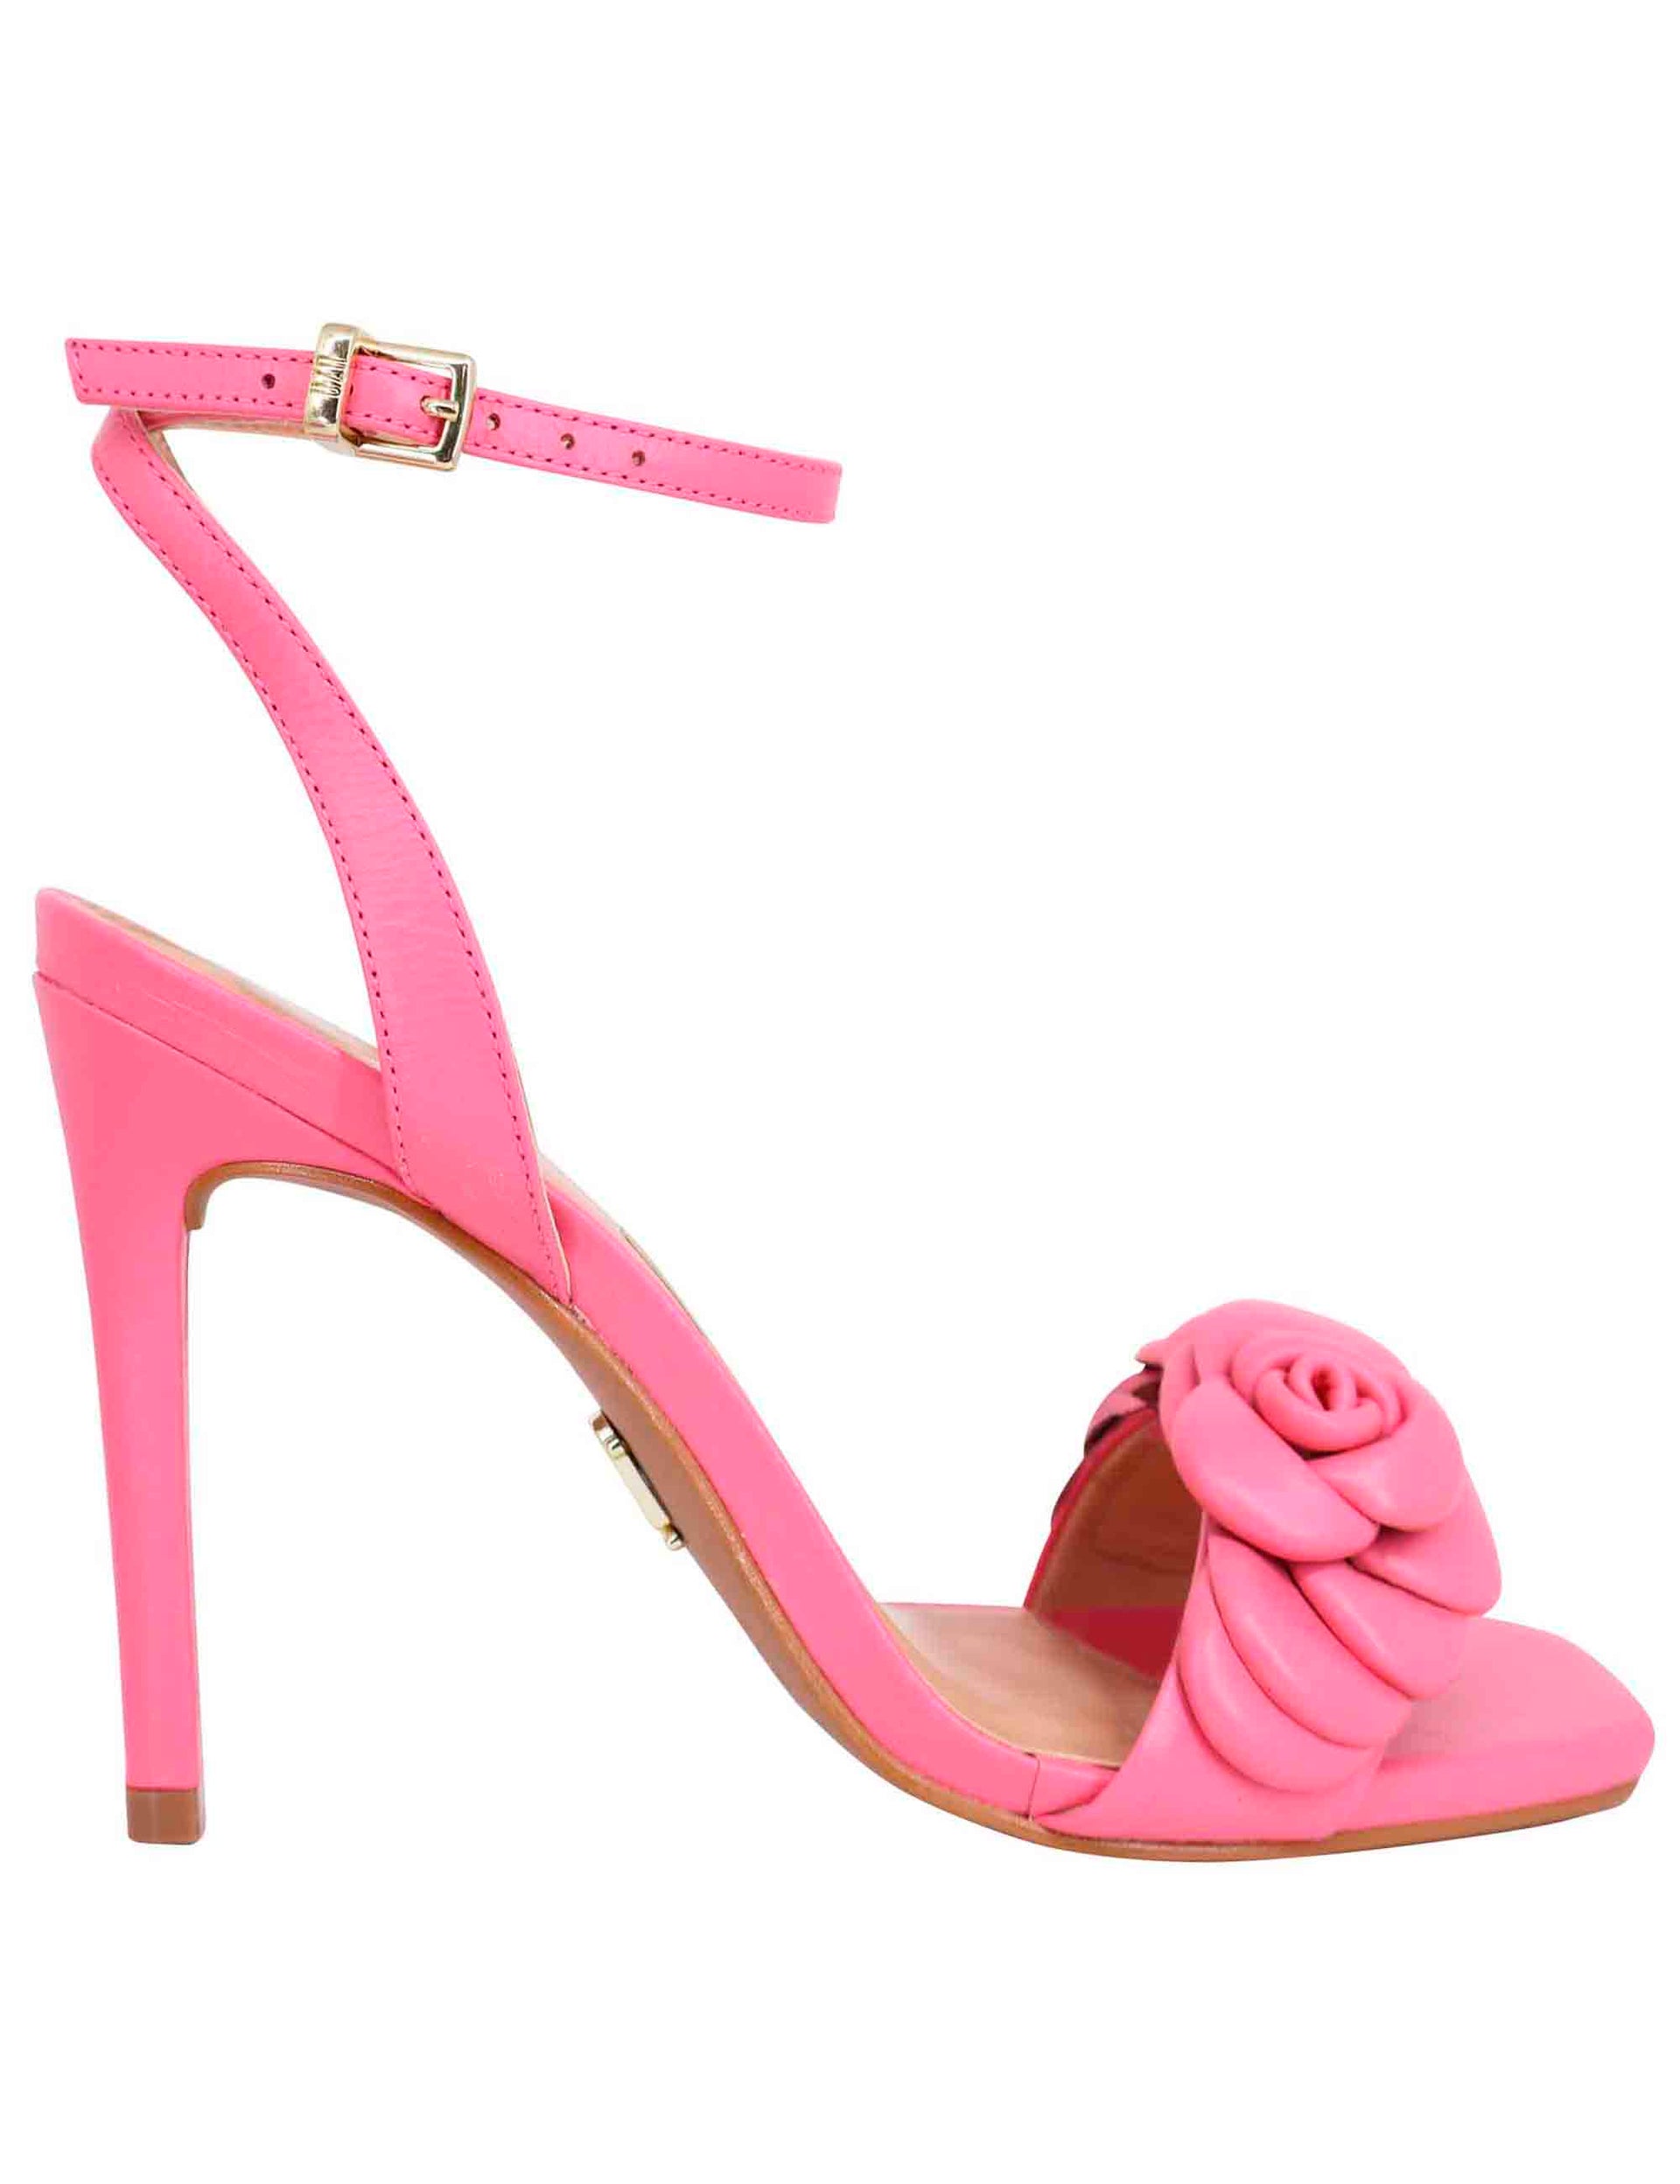 Women's pink leather sandals with high heel, ankle strap and leather flower